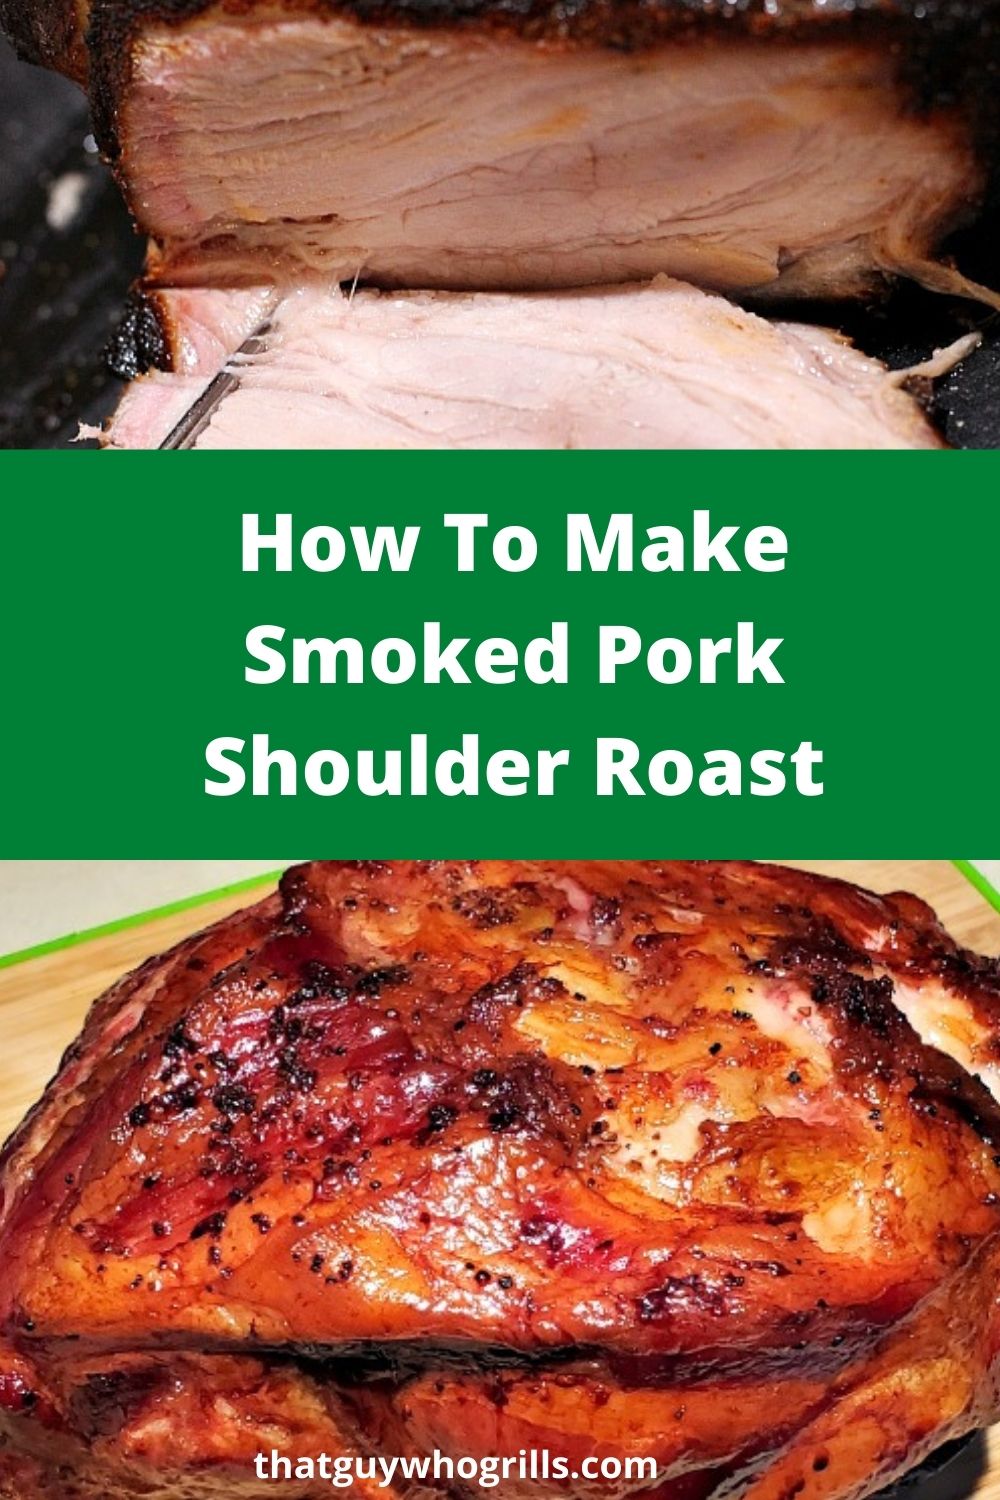 How To Make Smoked Pork Shoulder Roast!! This is easy to do while cooking low and slow the meat has so much flavor to it and makes amazing leftover meals! Shredded smoked pork makes for amazing sandwiches, beans, fried rice, and chilis as well!